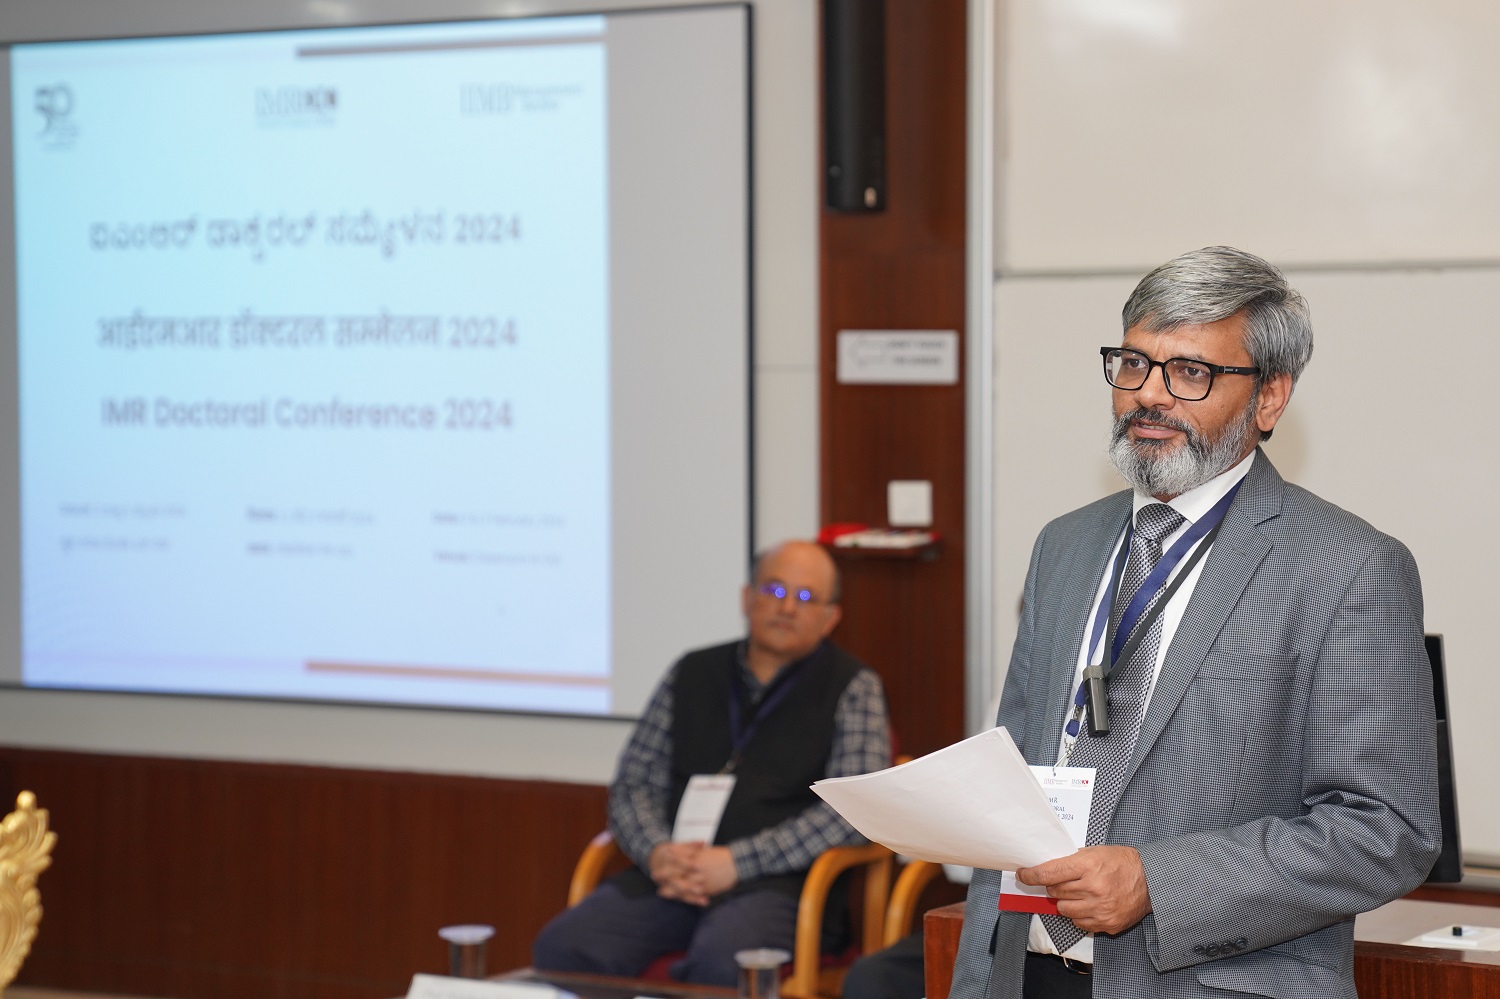 Conference Chair and IIMB faculty from the Organizational Behavior & Human Resources Management area, Professor Apurva Sanaria, introduces the theme and background of IMRDC 2024.